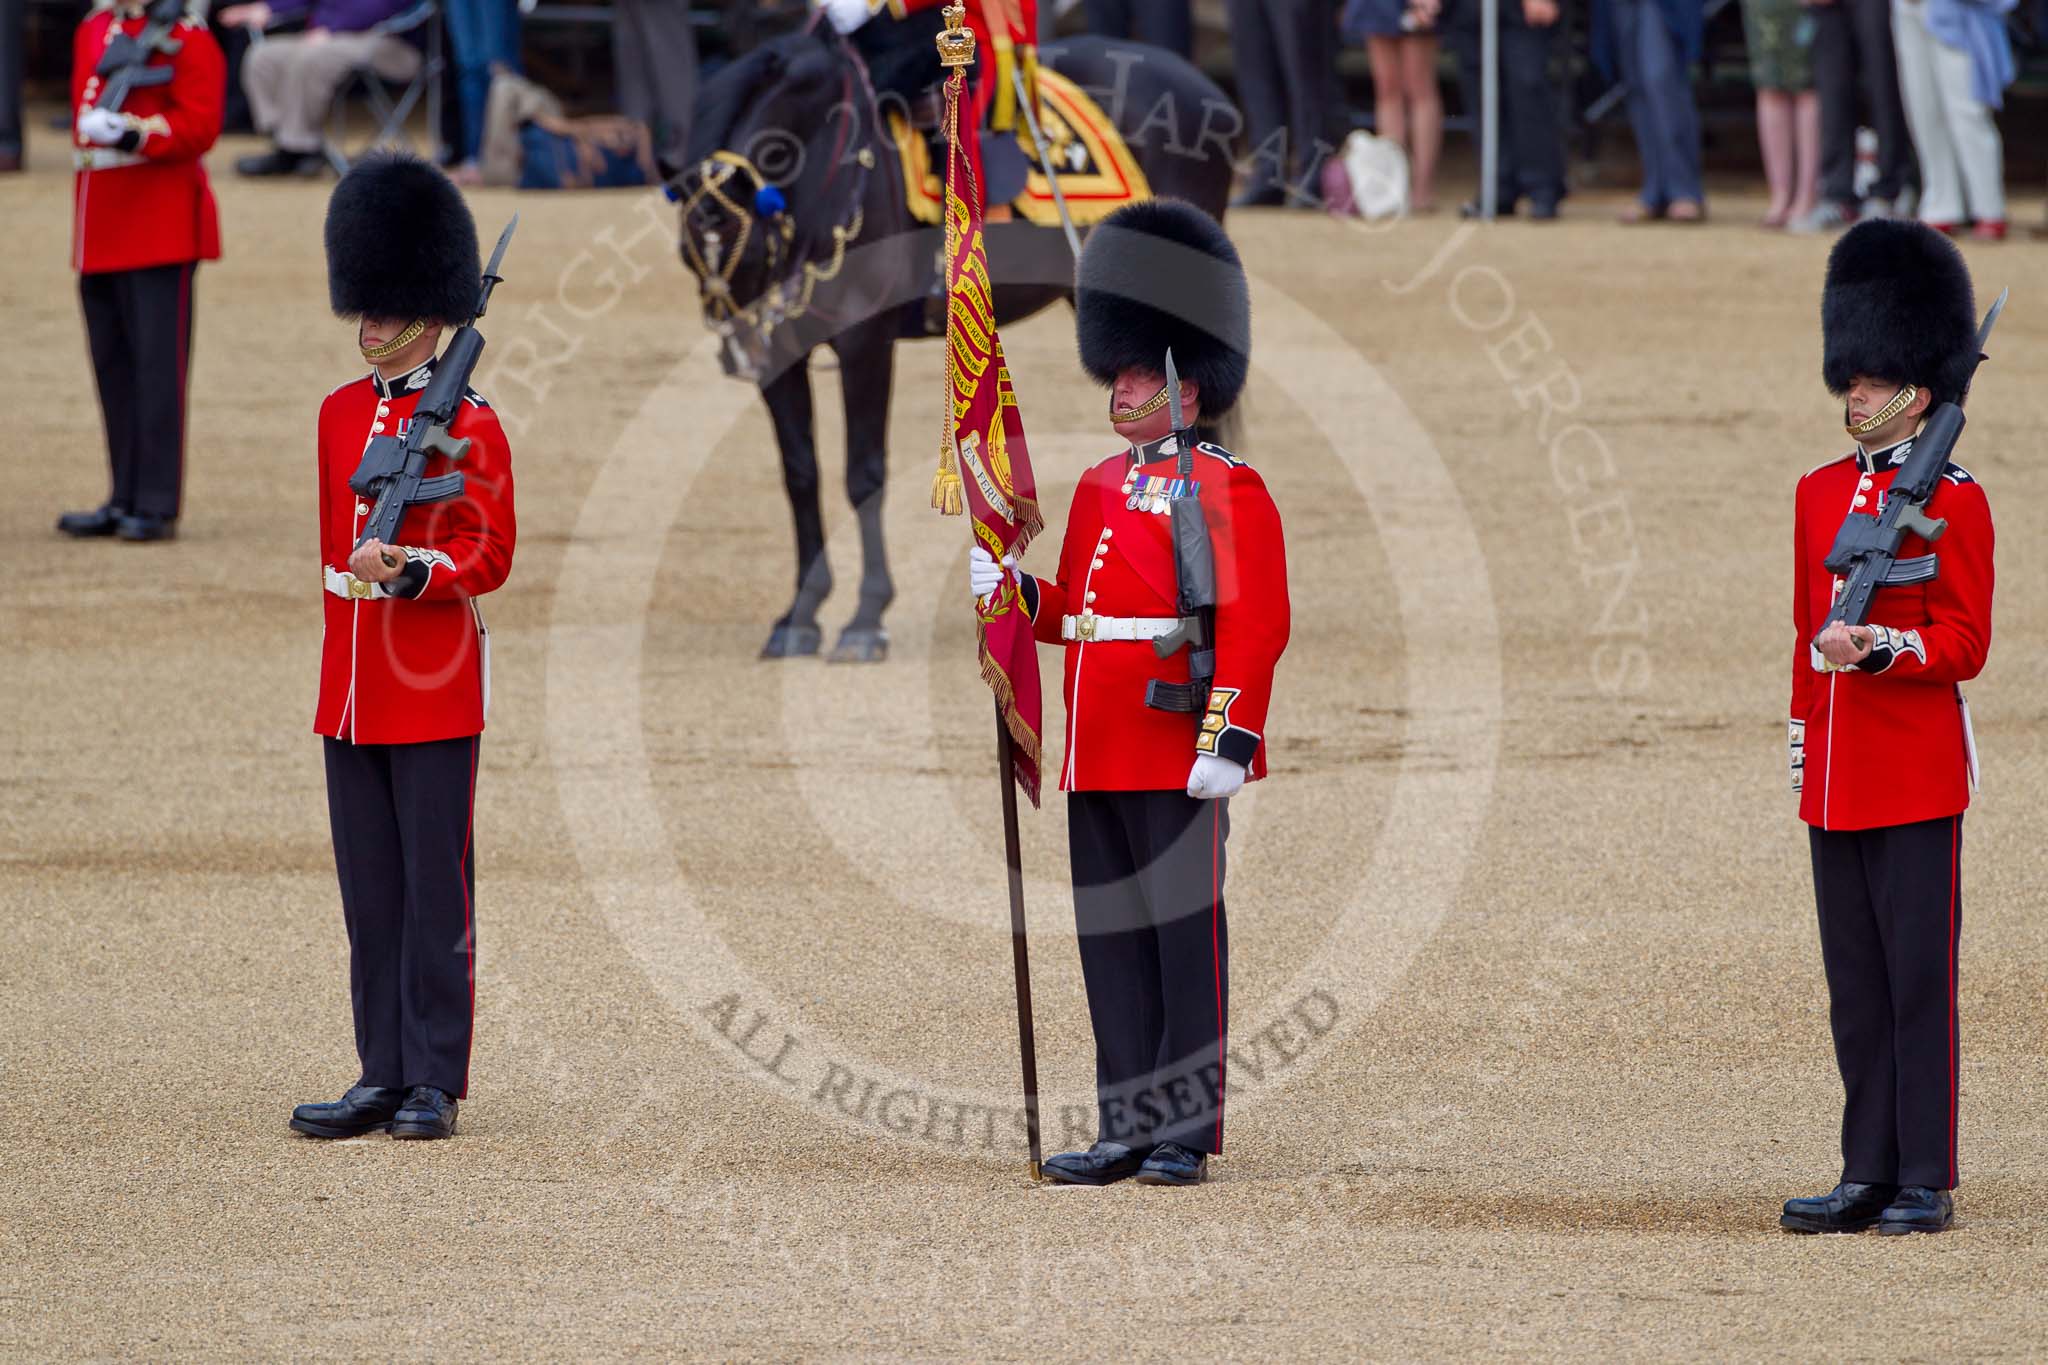 The Colonel's Review 2011: Colour Sergeant Chris Millin, standing between the two sentries, holding the Colour, shortly before handing it over to the Escort for the Colour..
Horse Guards Parade, Westminster,
London SW1,

United Kingdom,
on 04 June 2011 at 11:18, image #127